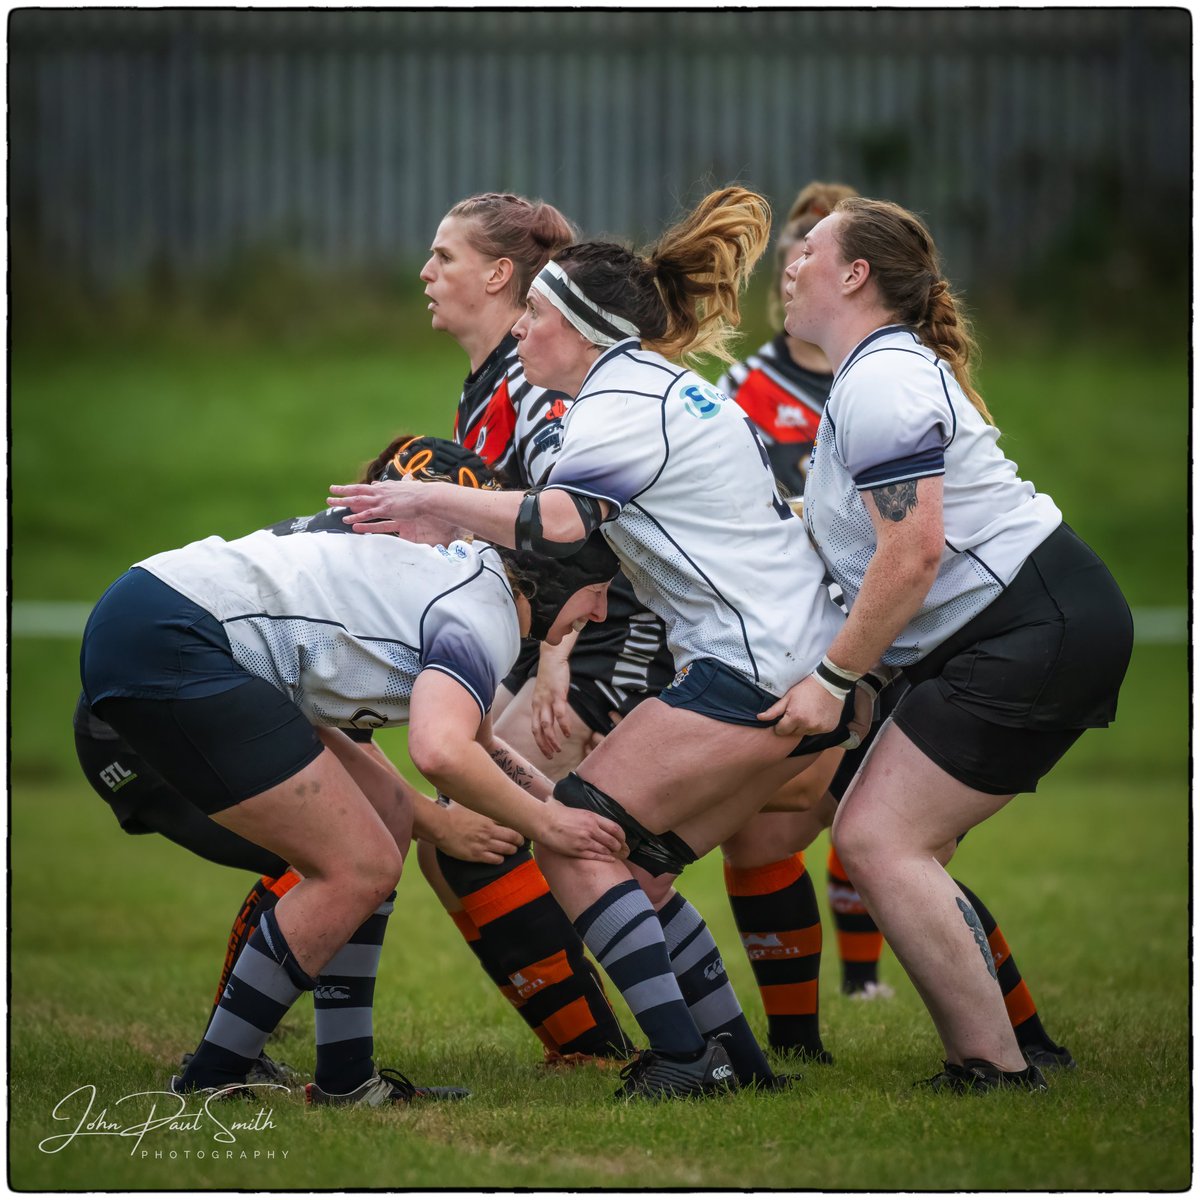 Quick pic from today's @WorkingtonWRUFC game.. #womensrugby #grassrootsrugby #rugbyunion @bbccumbriasport